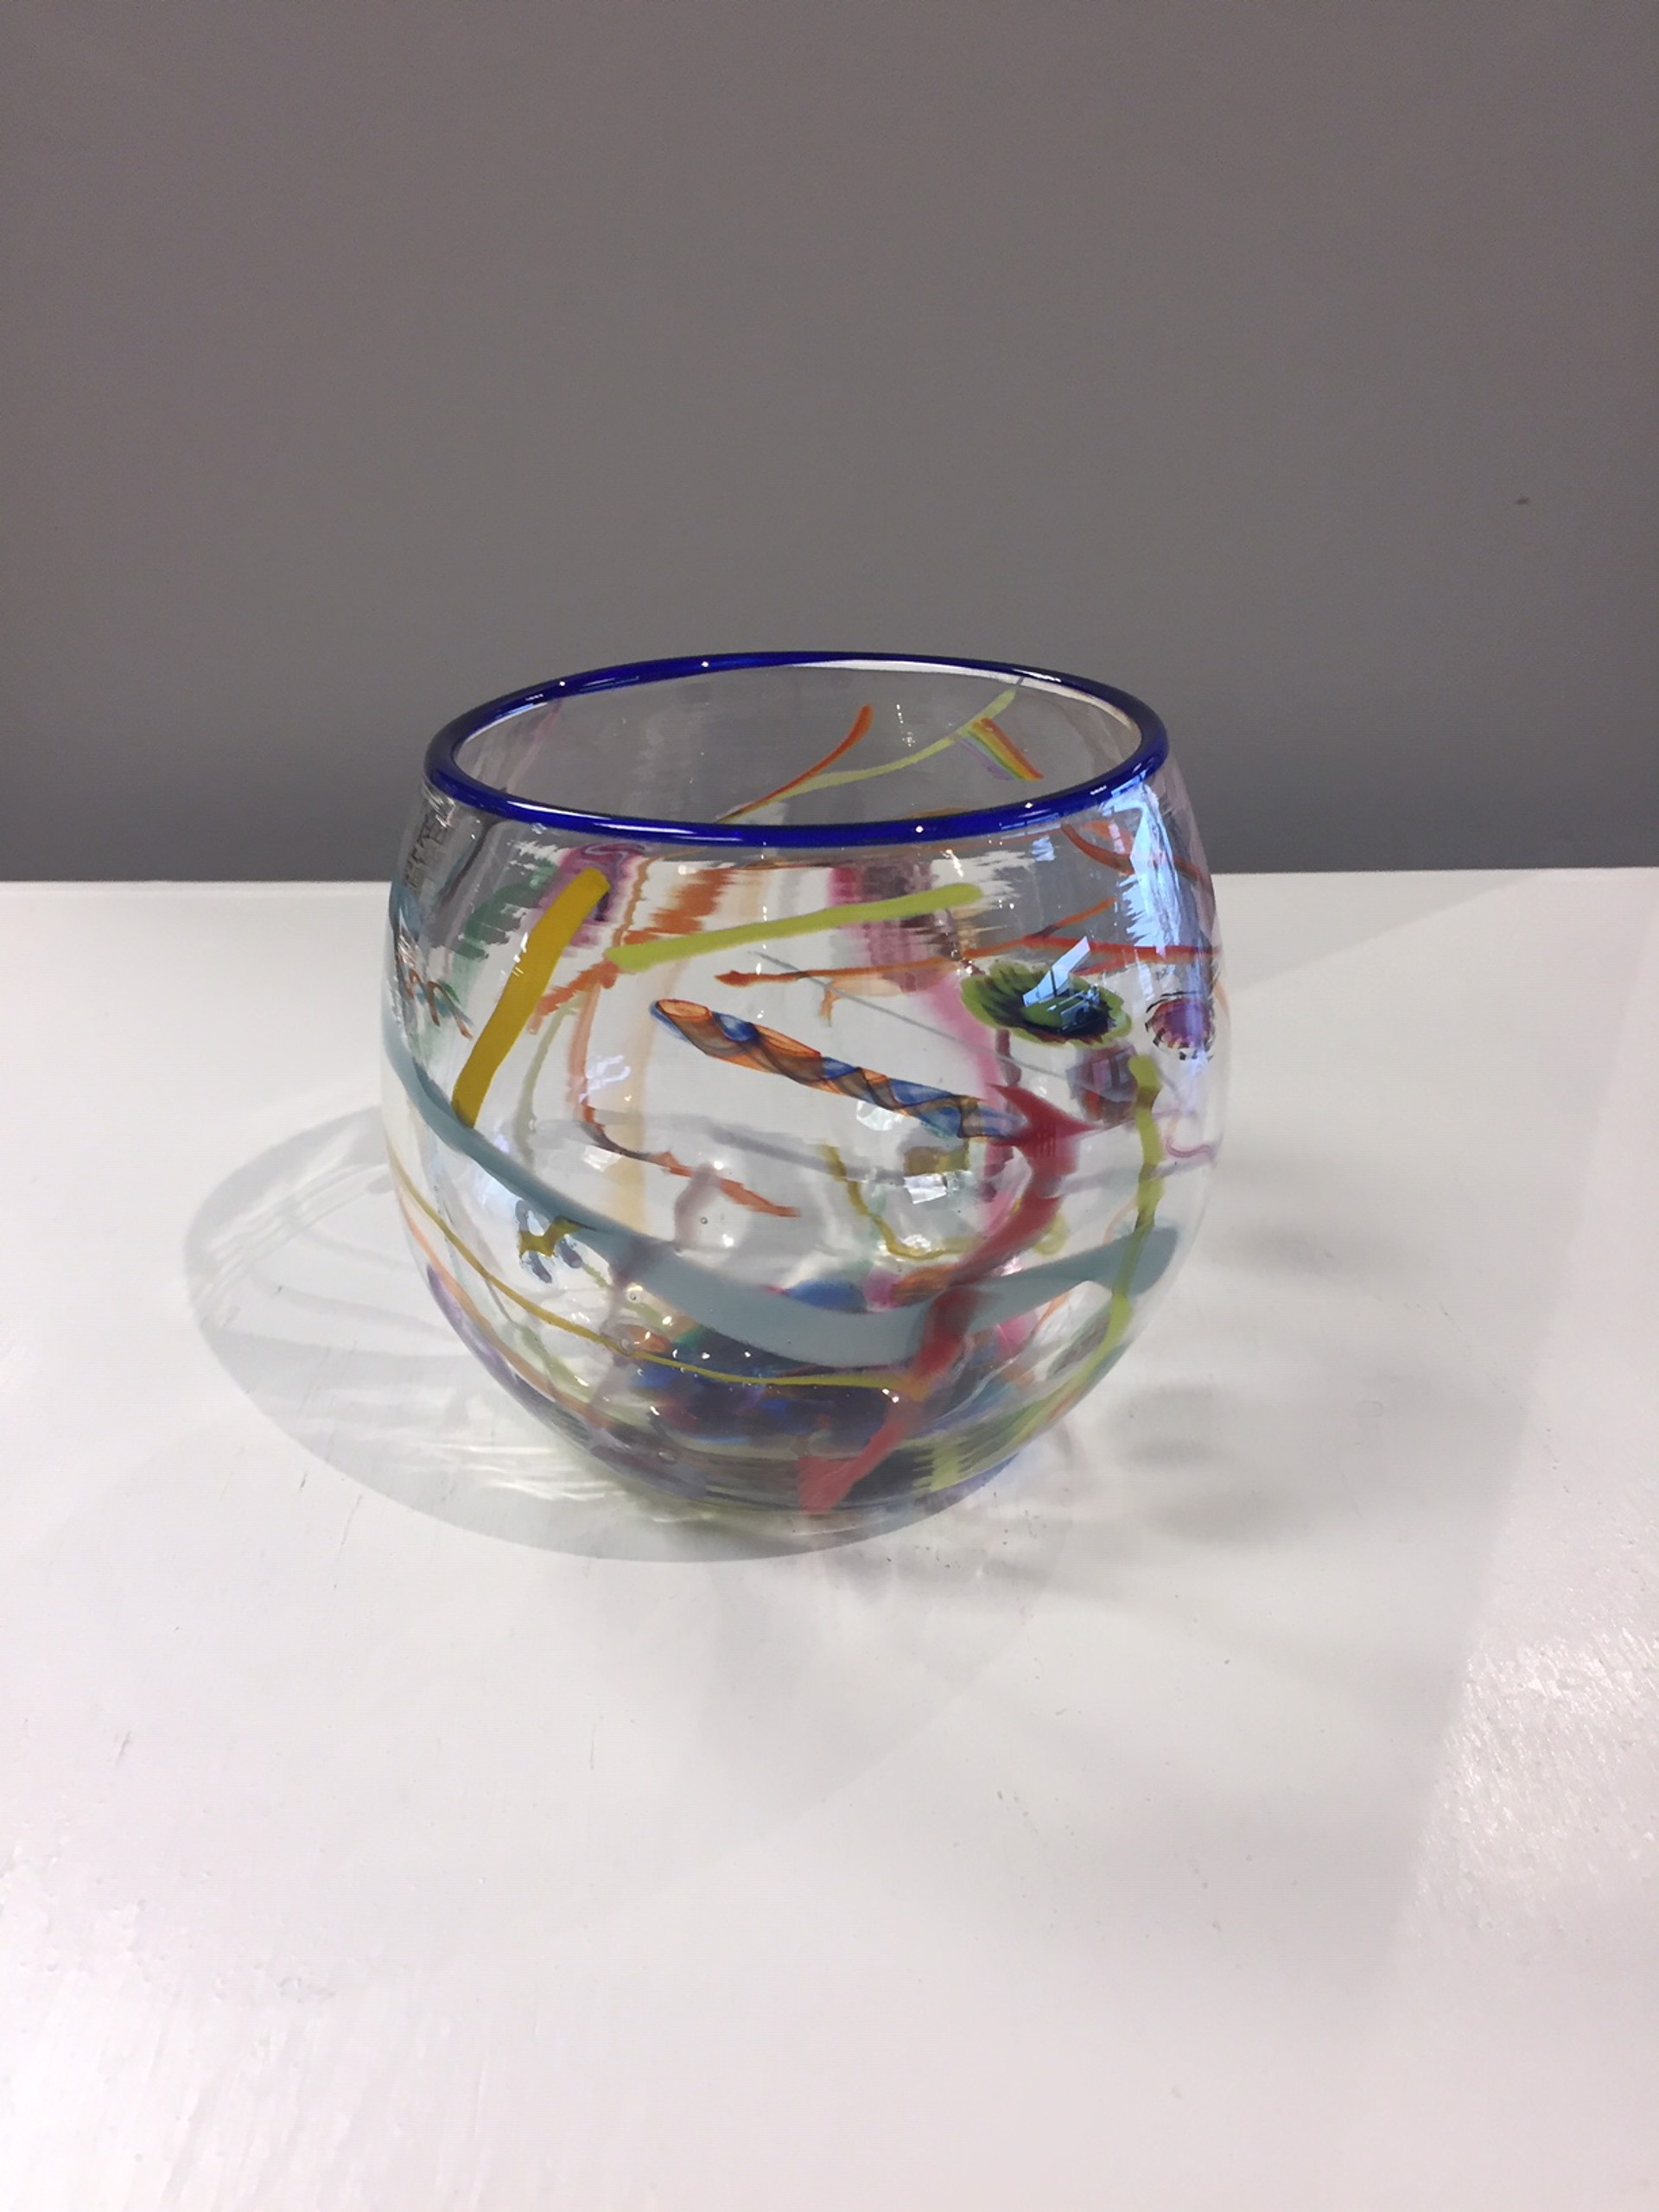 Circus Bowl by AlBo Glass